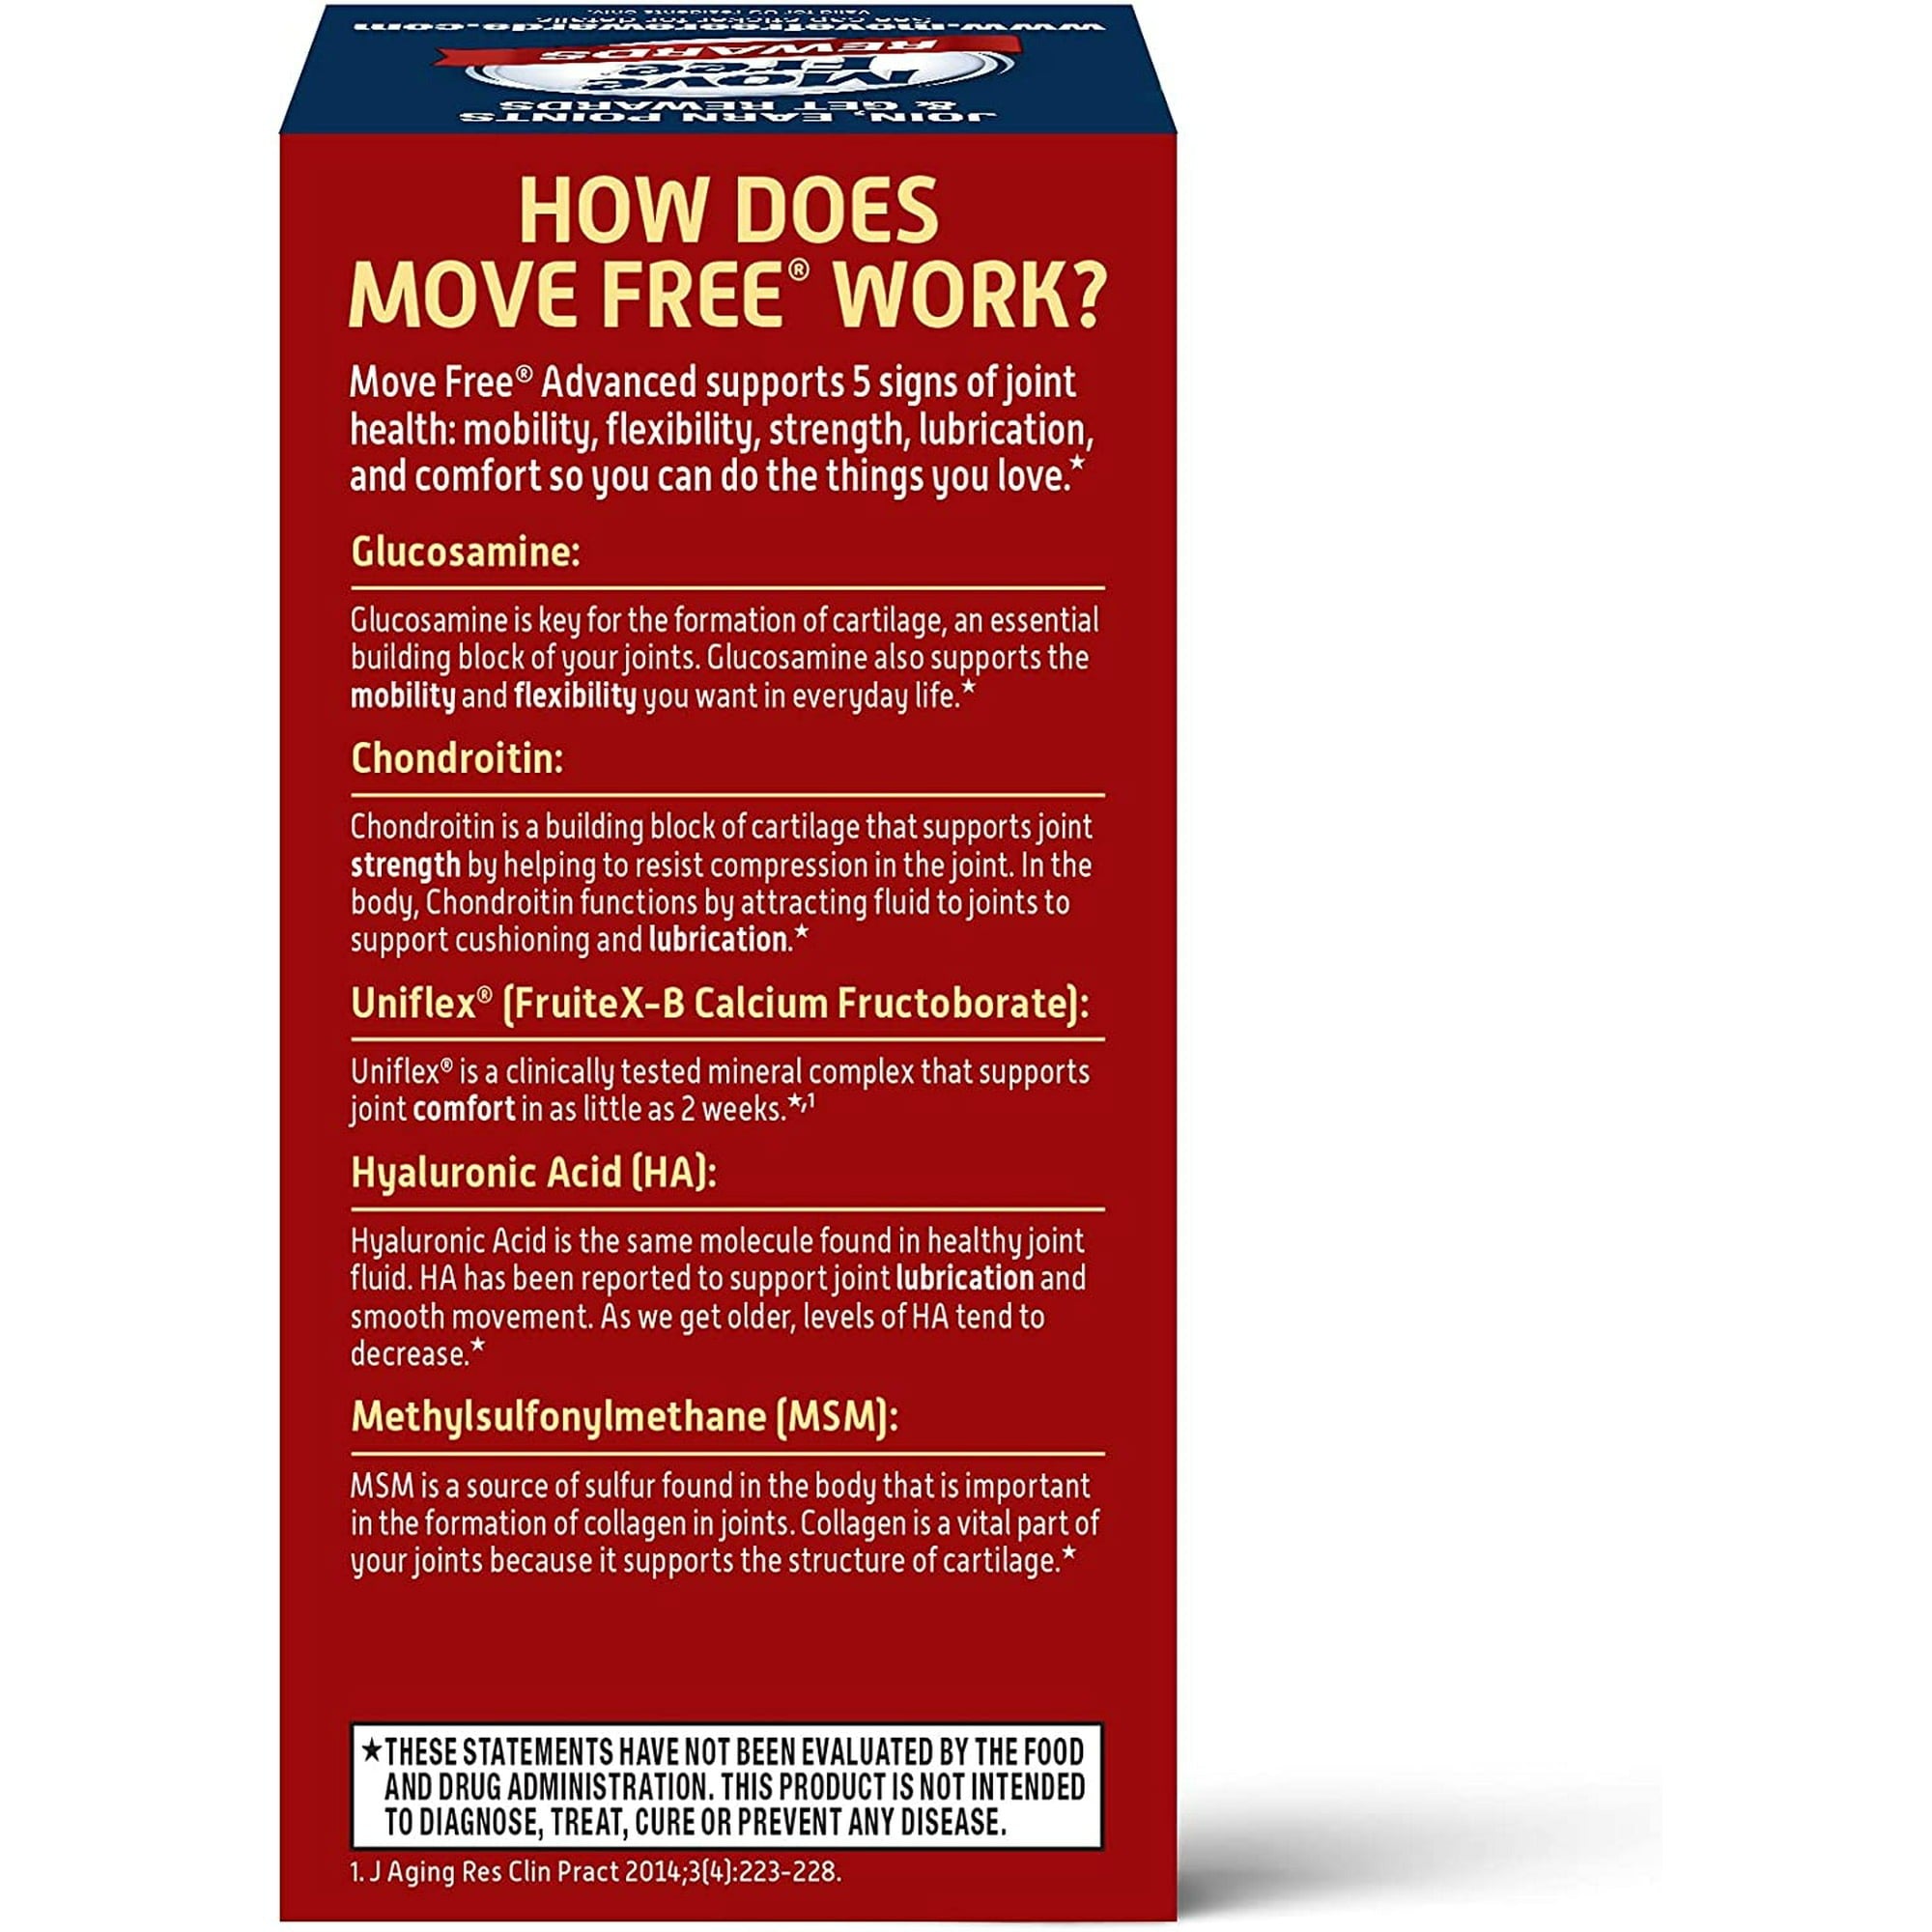 Schiff Move Free Joint Health Advanced Plus MSM 120 Coated Tablets